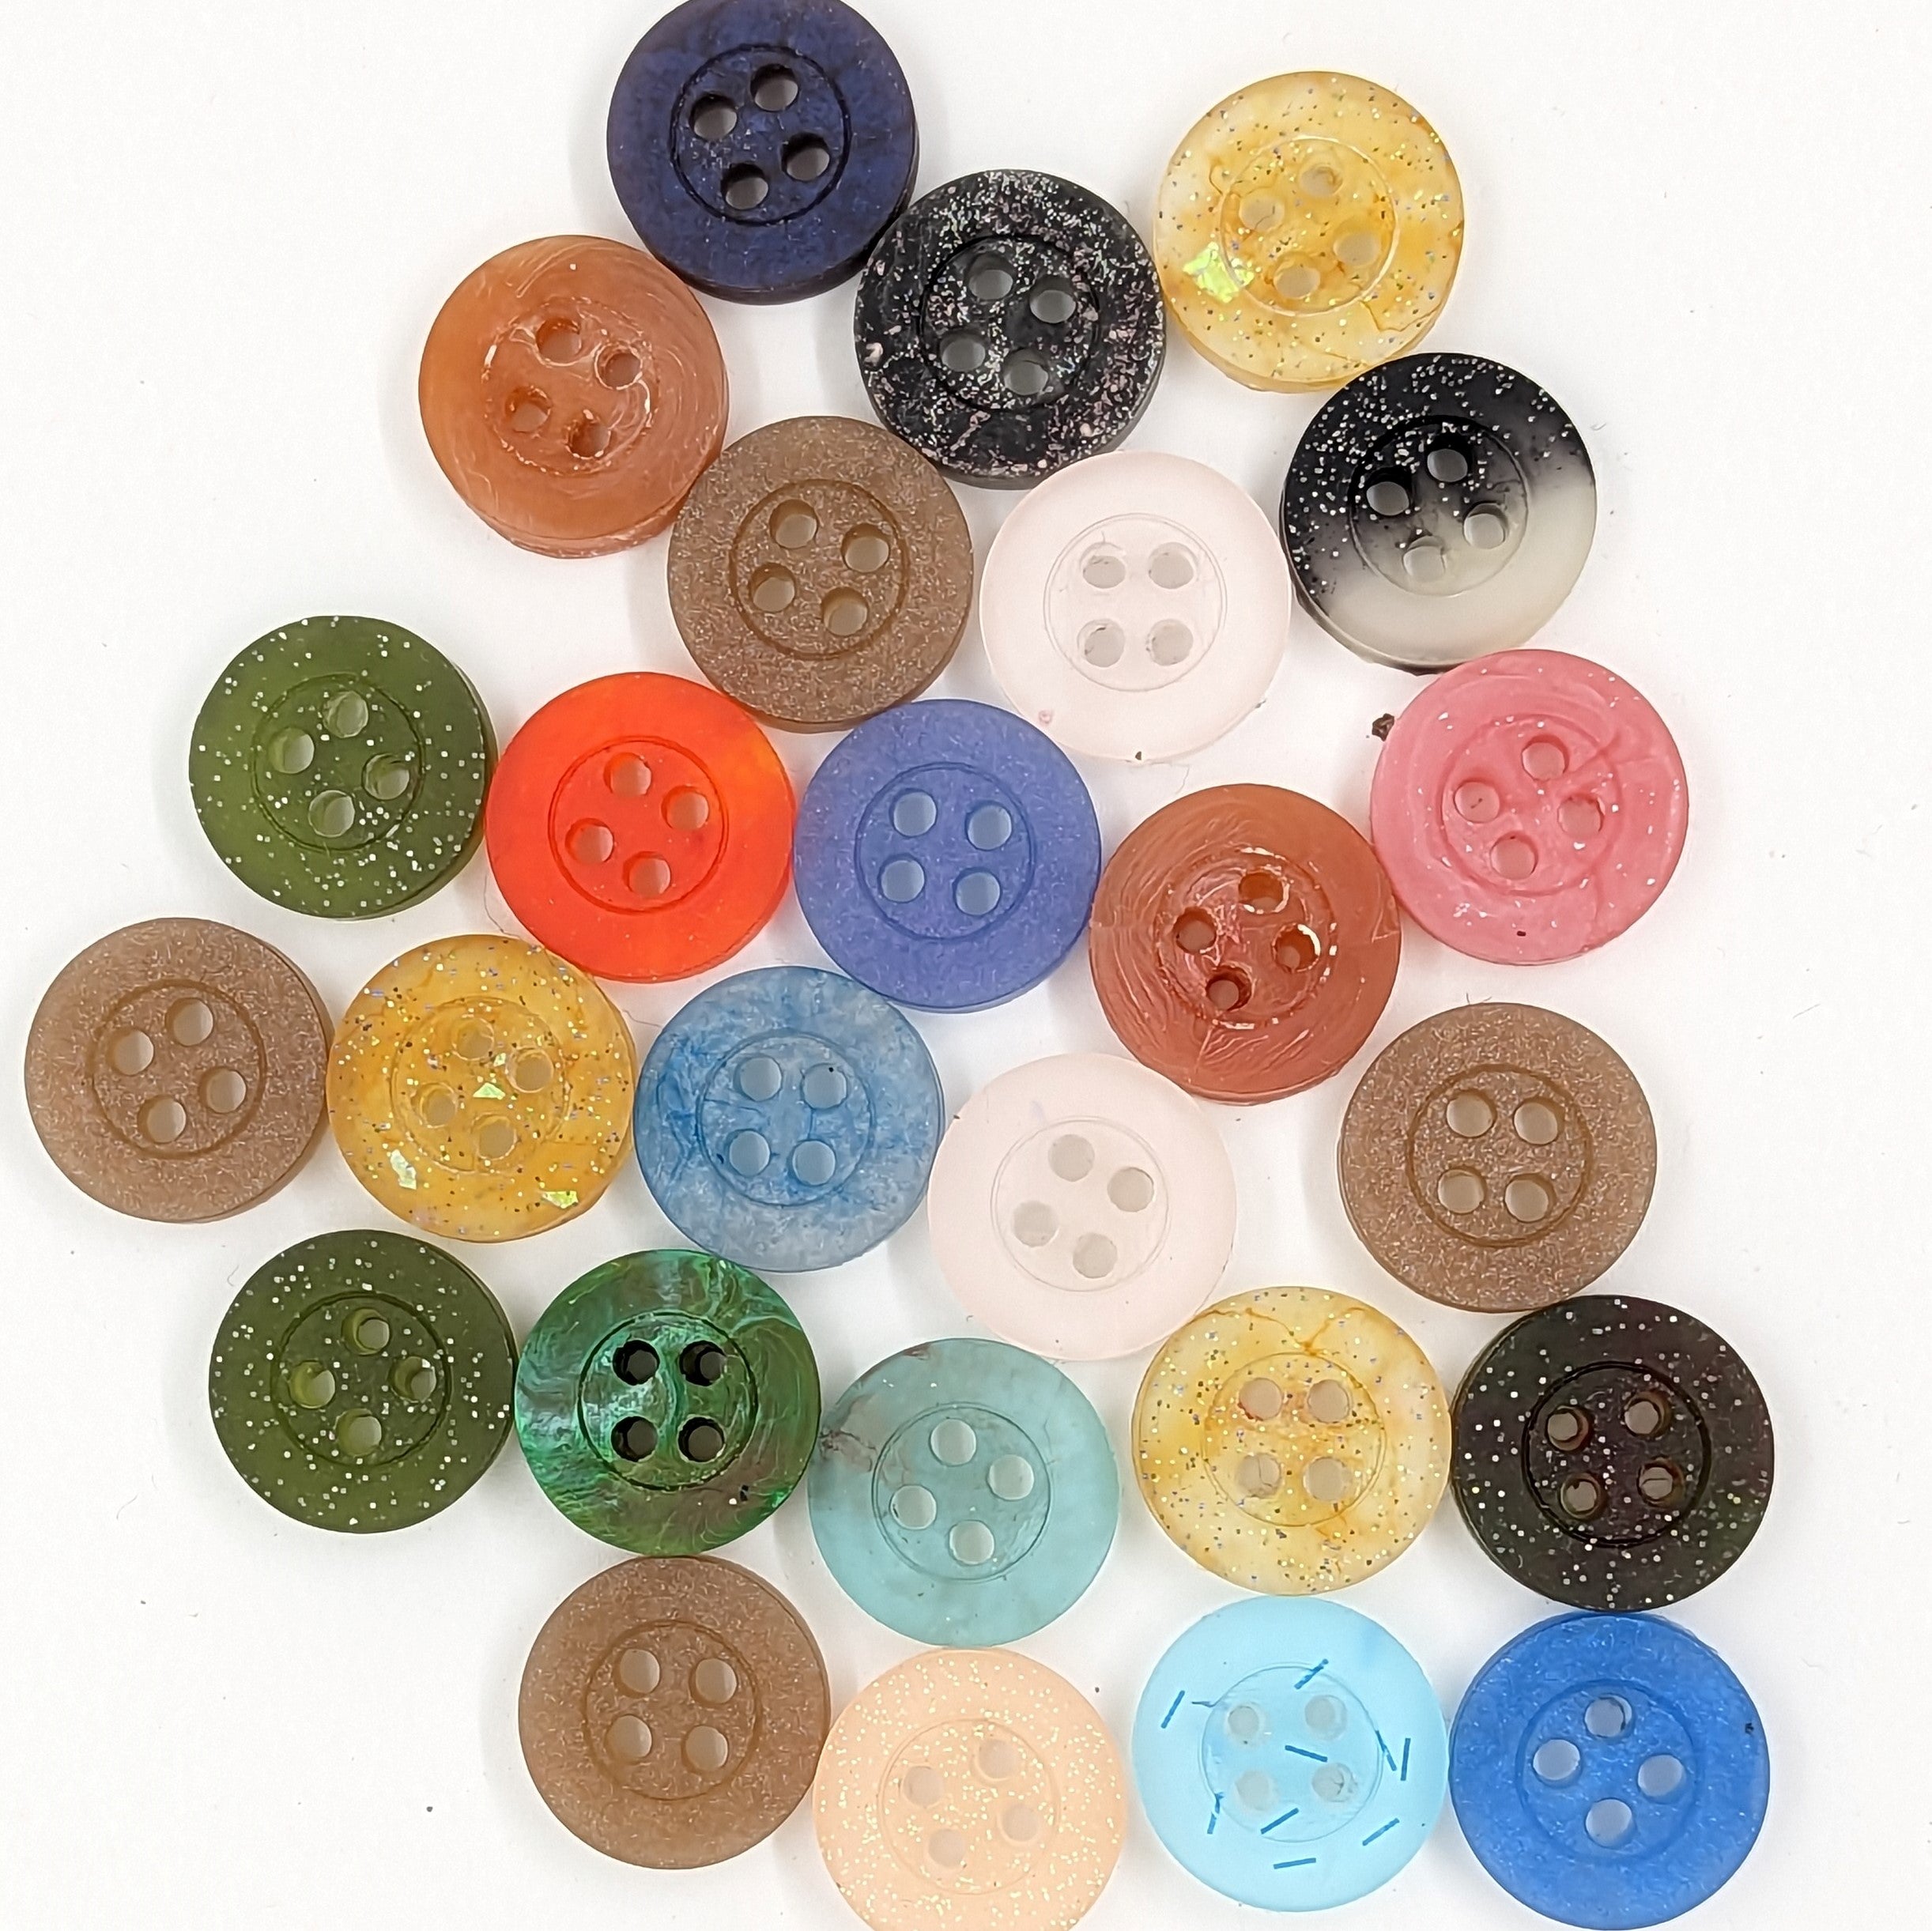 Mystery Hand-Made Resin 4 Hole Button - 21.5mm Diameter